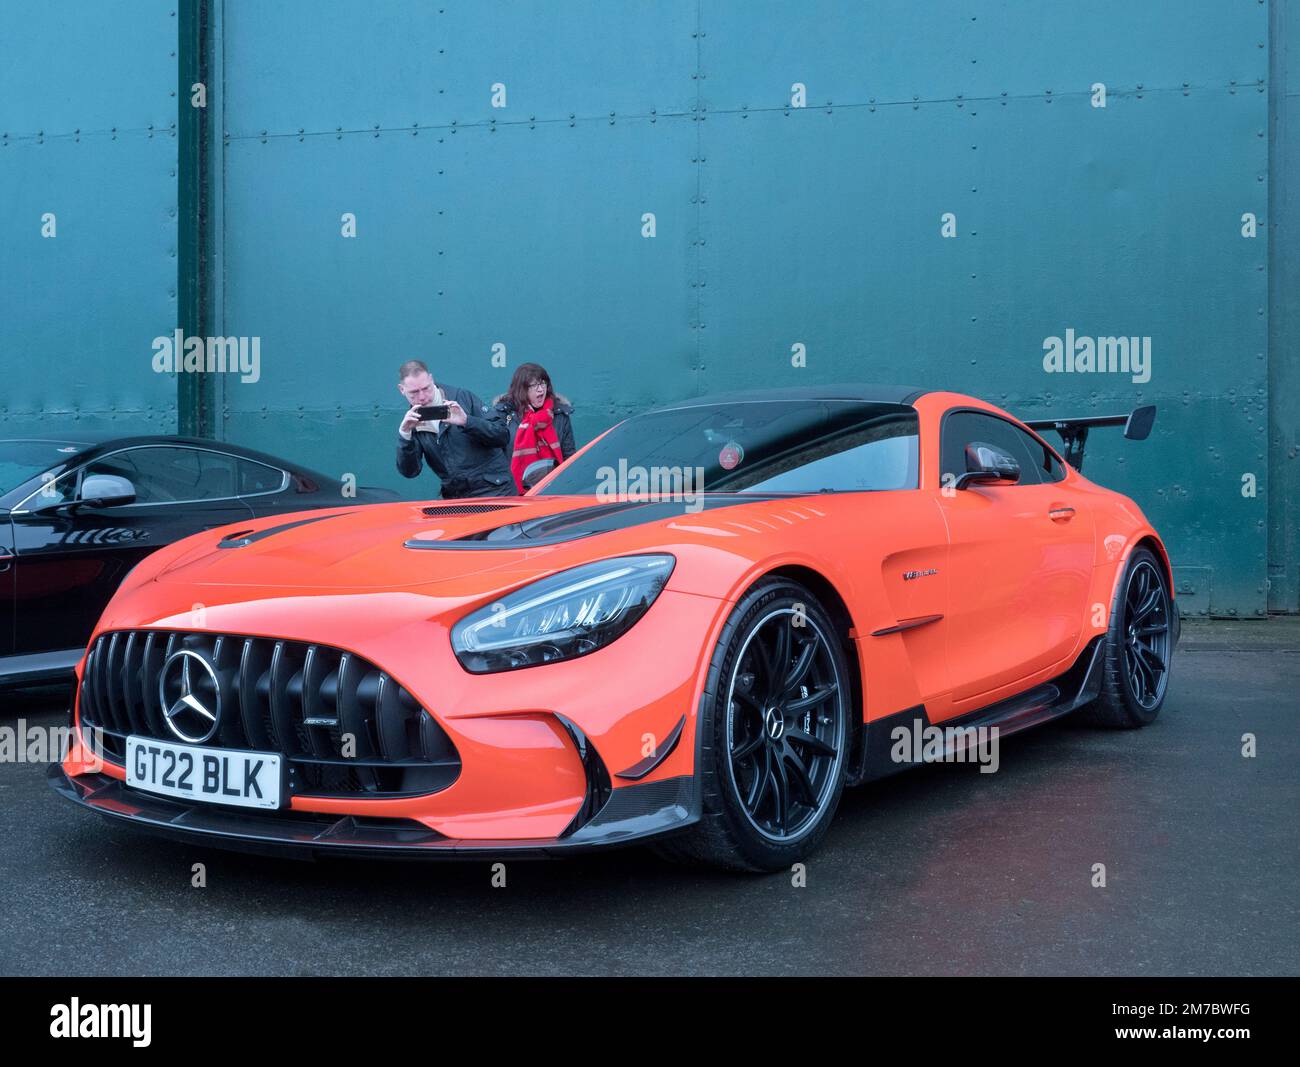 AMG Mercedes- Benz Coupe at the Bicester Winter Scramble at Bicester heritage centre Oxfordshire UK Stock Photo